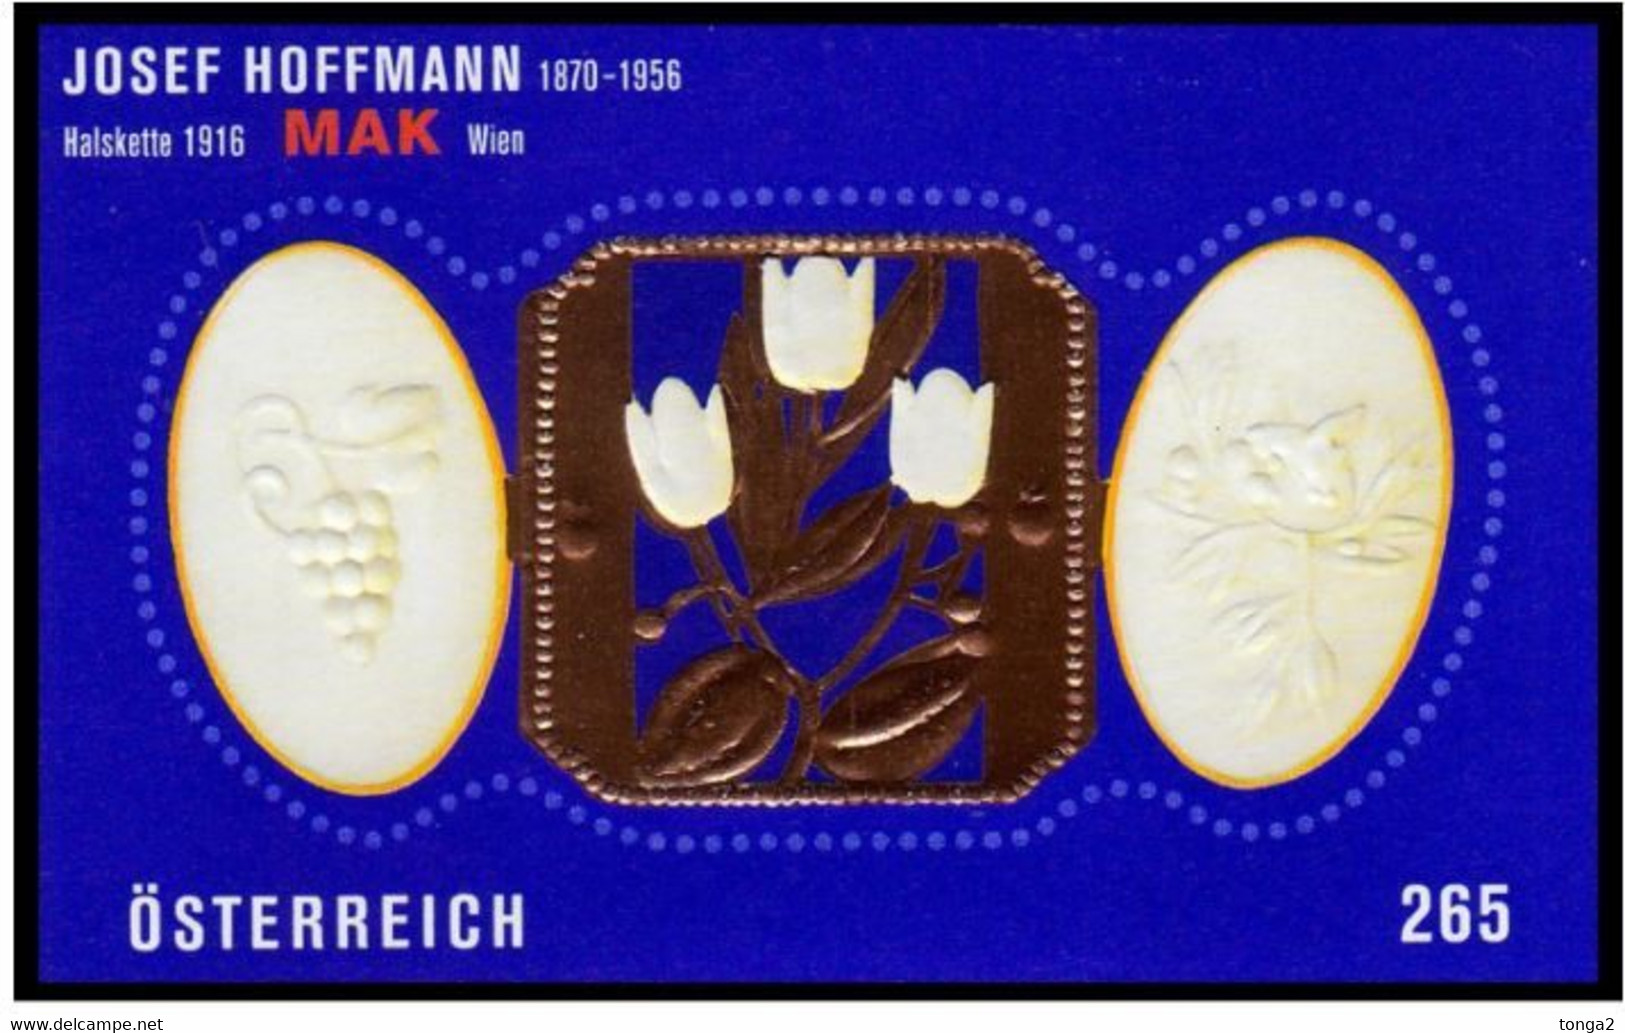 Austria 2007 Hoffmann Stamp With 22 Carat Gold Affixed - Unusual - Holograms